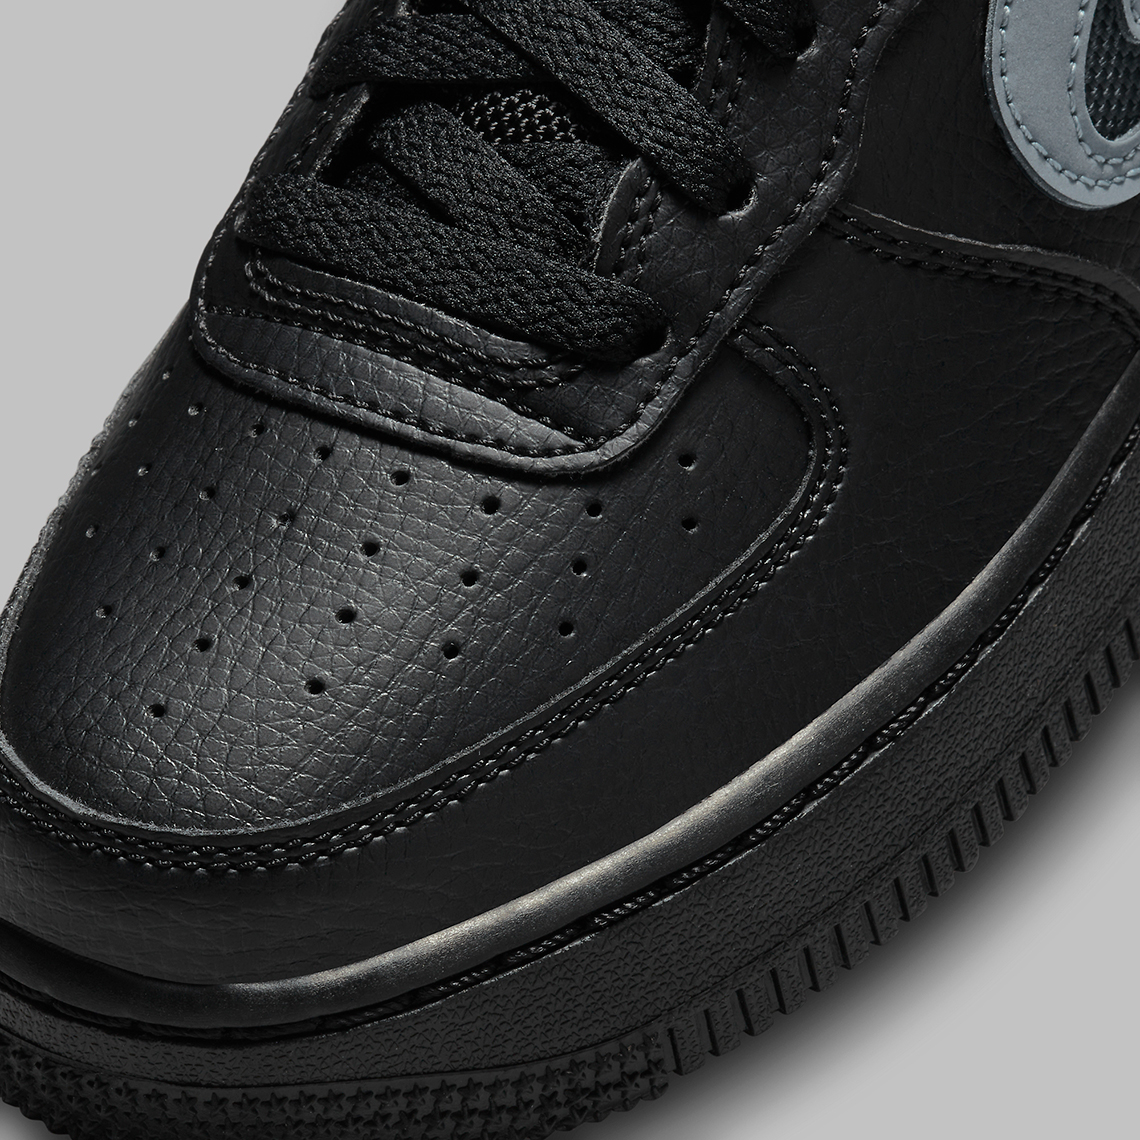 Nike Air Force 1 Low Gs Cut Out Black Grey Fq2413 001 8